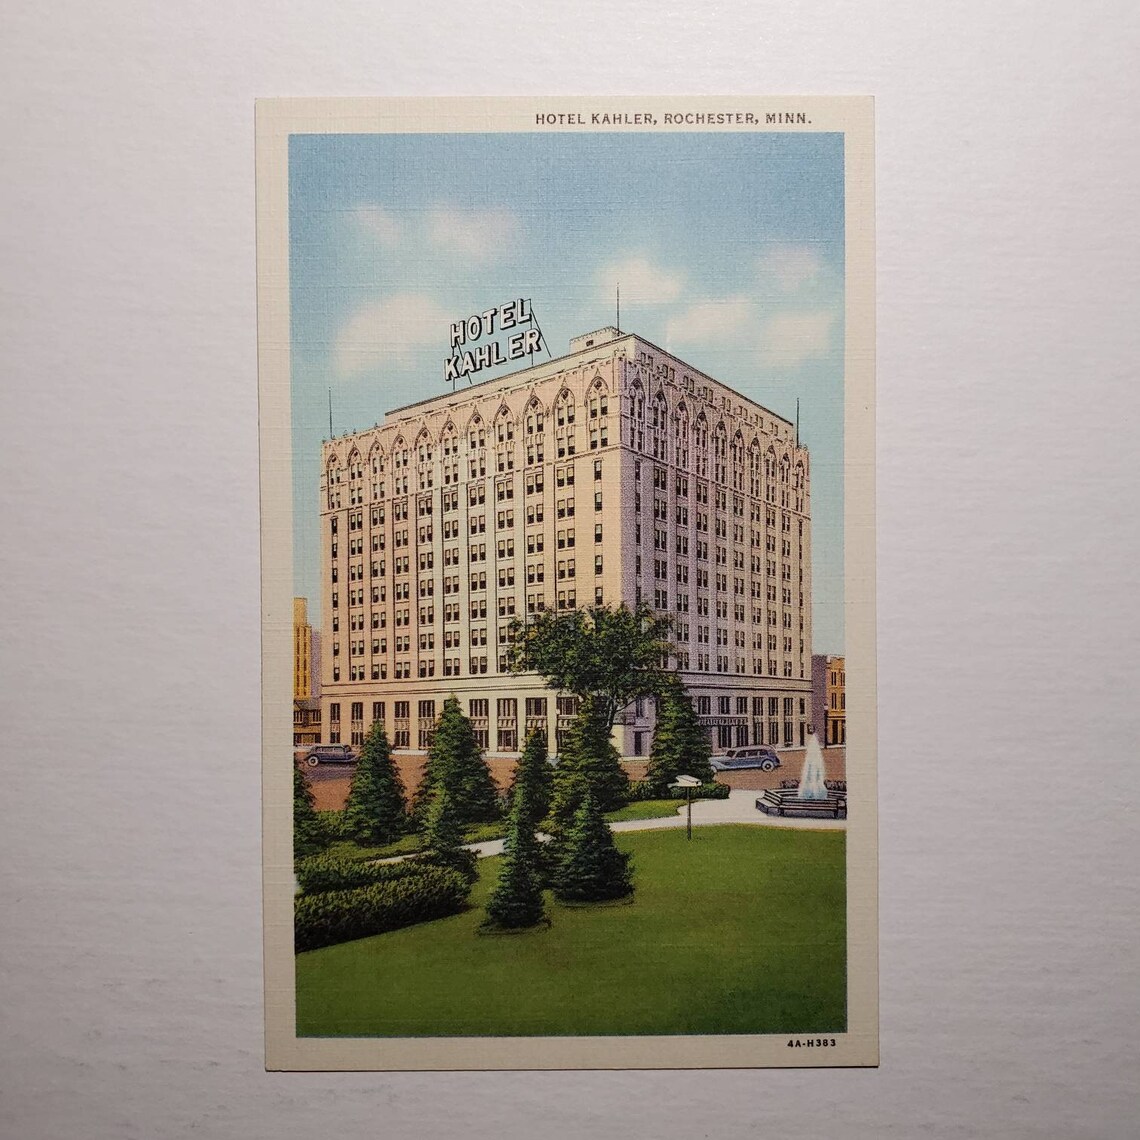 Hotel Kahler in Rochester MN Postcard from 1940s vintage | Etsy